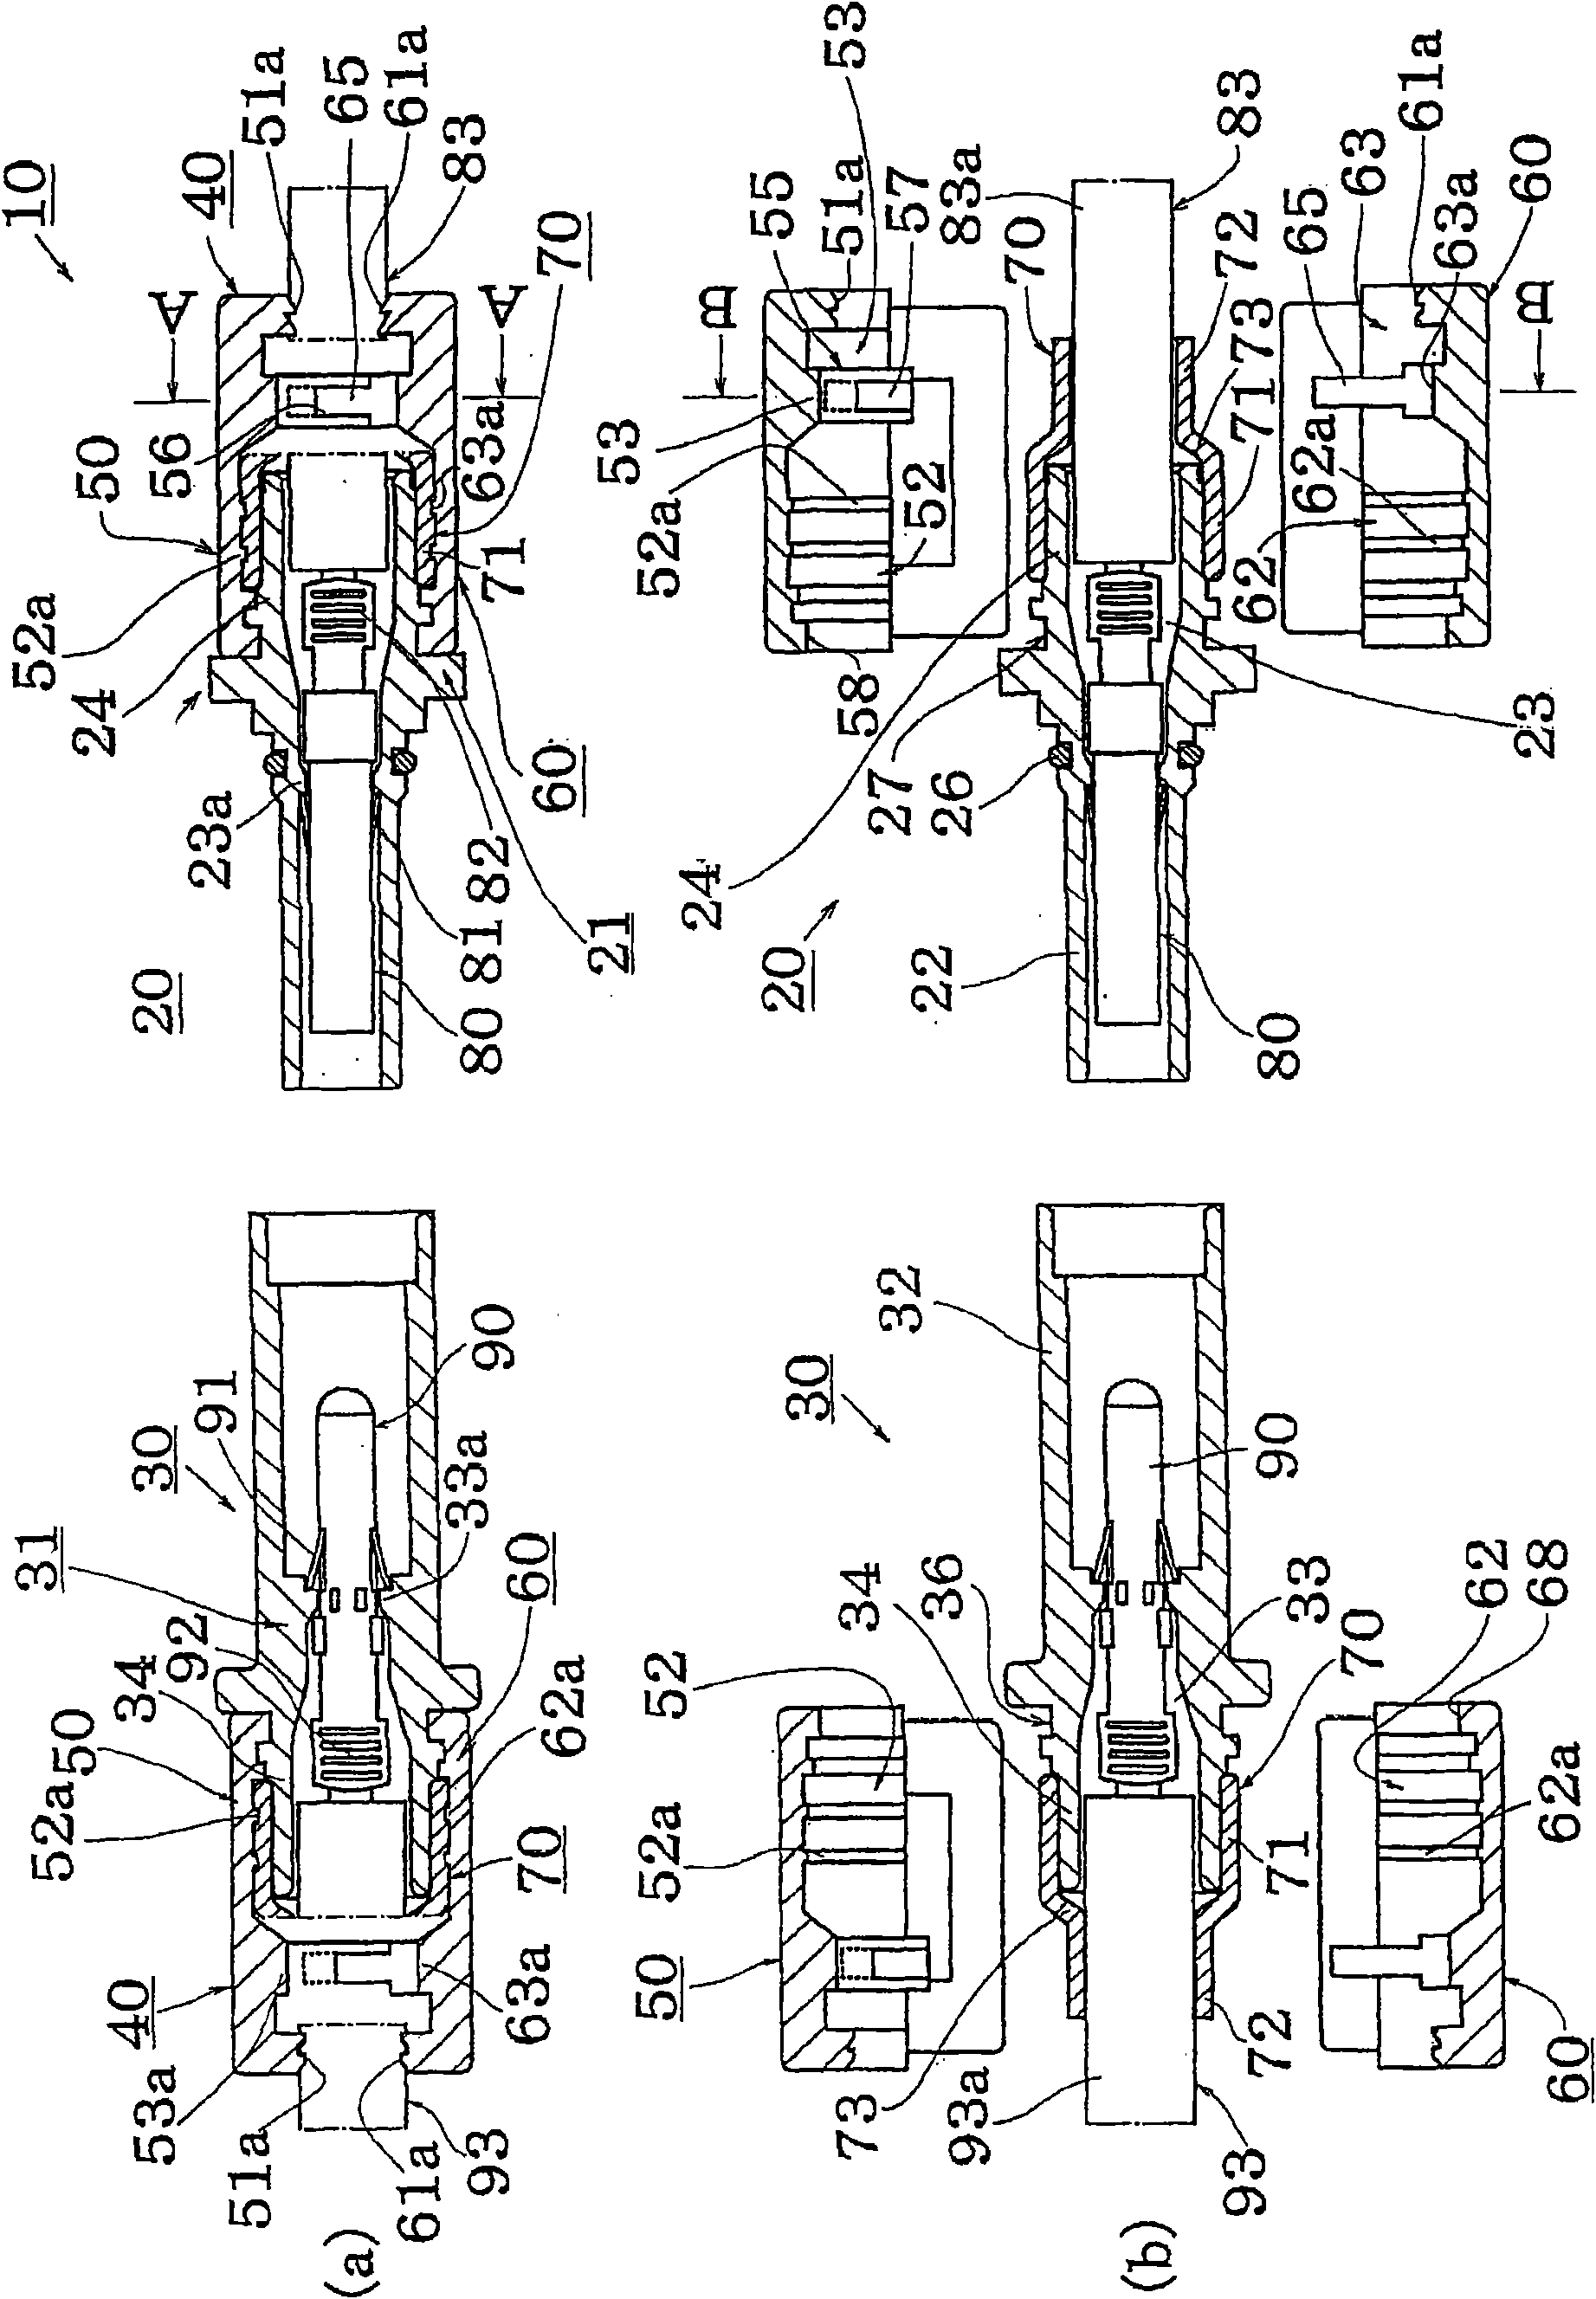 Water-tight connector and relay connector